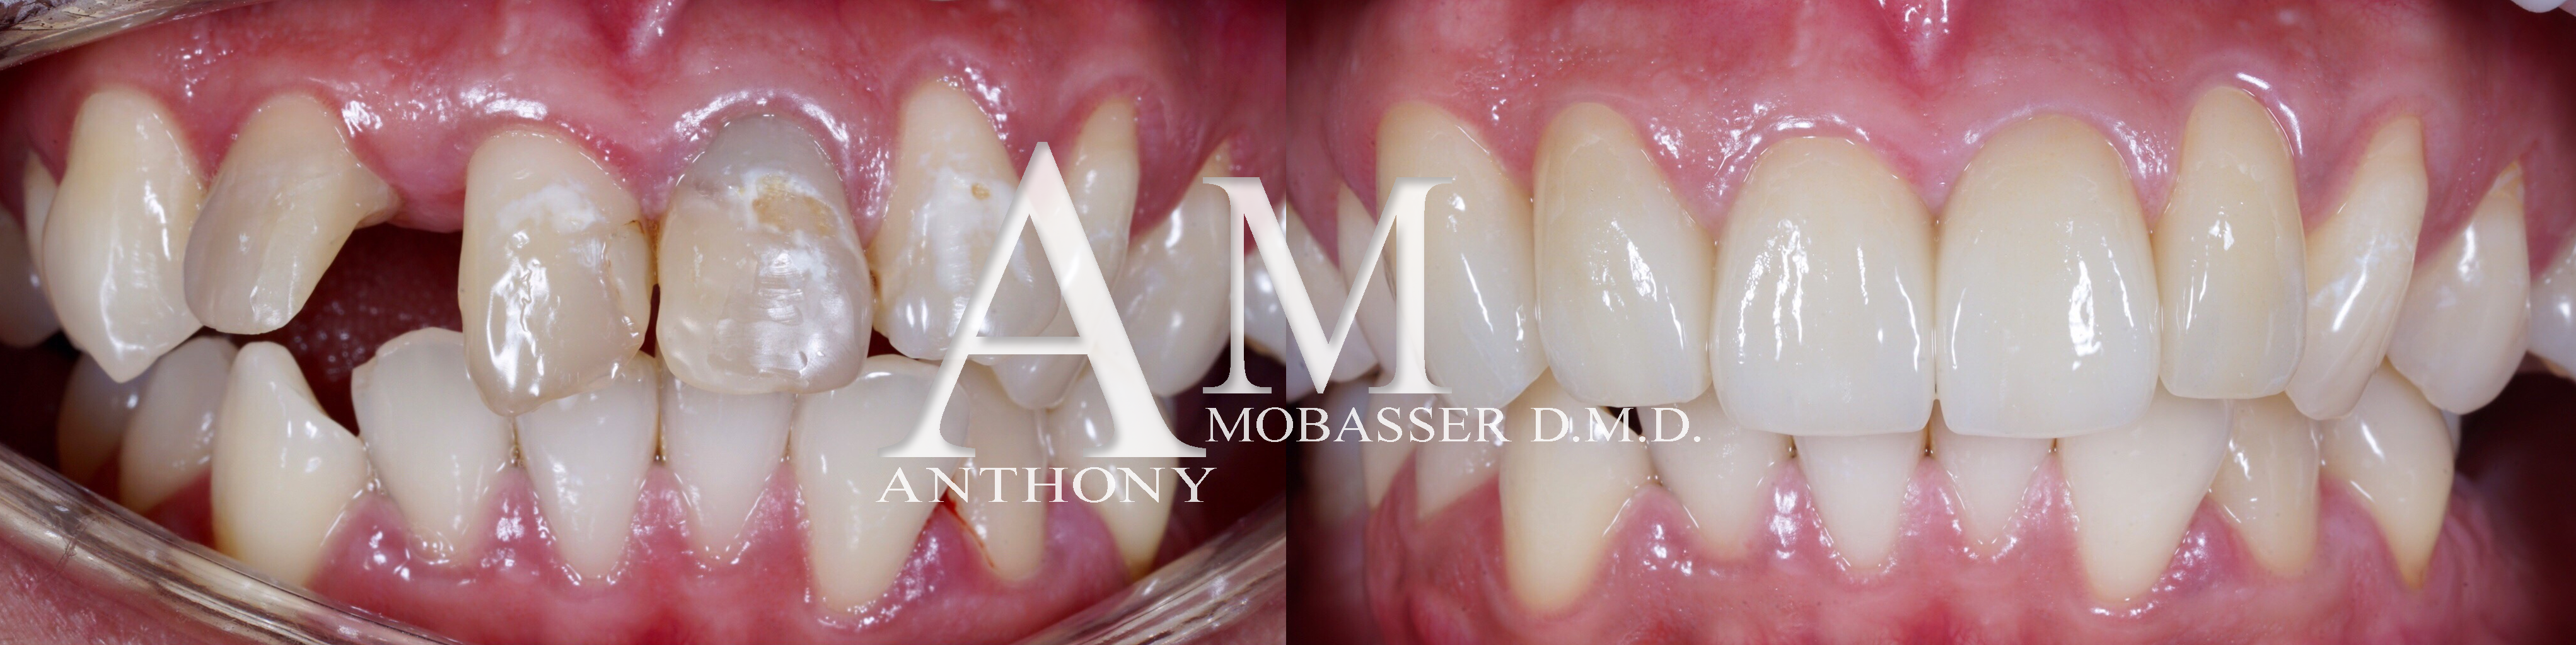 Best Cosmetic Dentist in the World | Dr. Anthony Mobasser